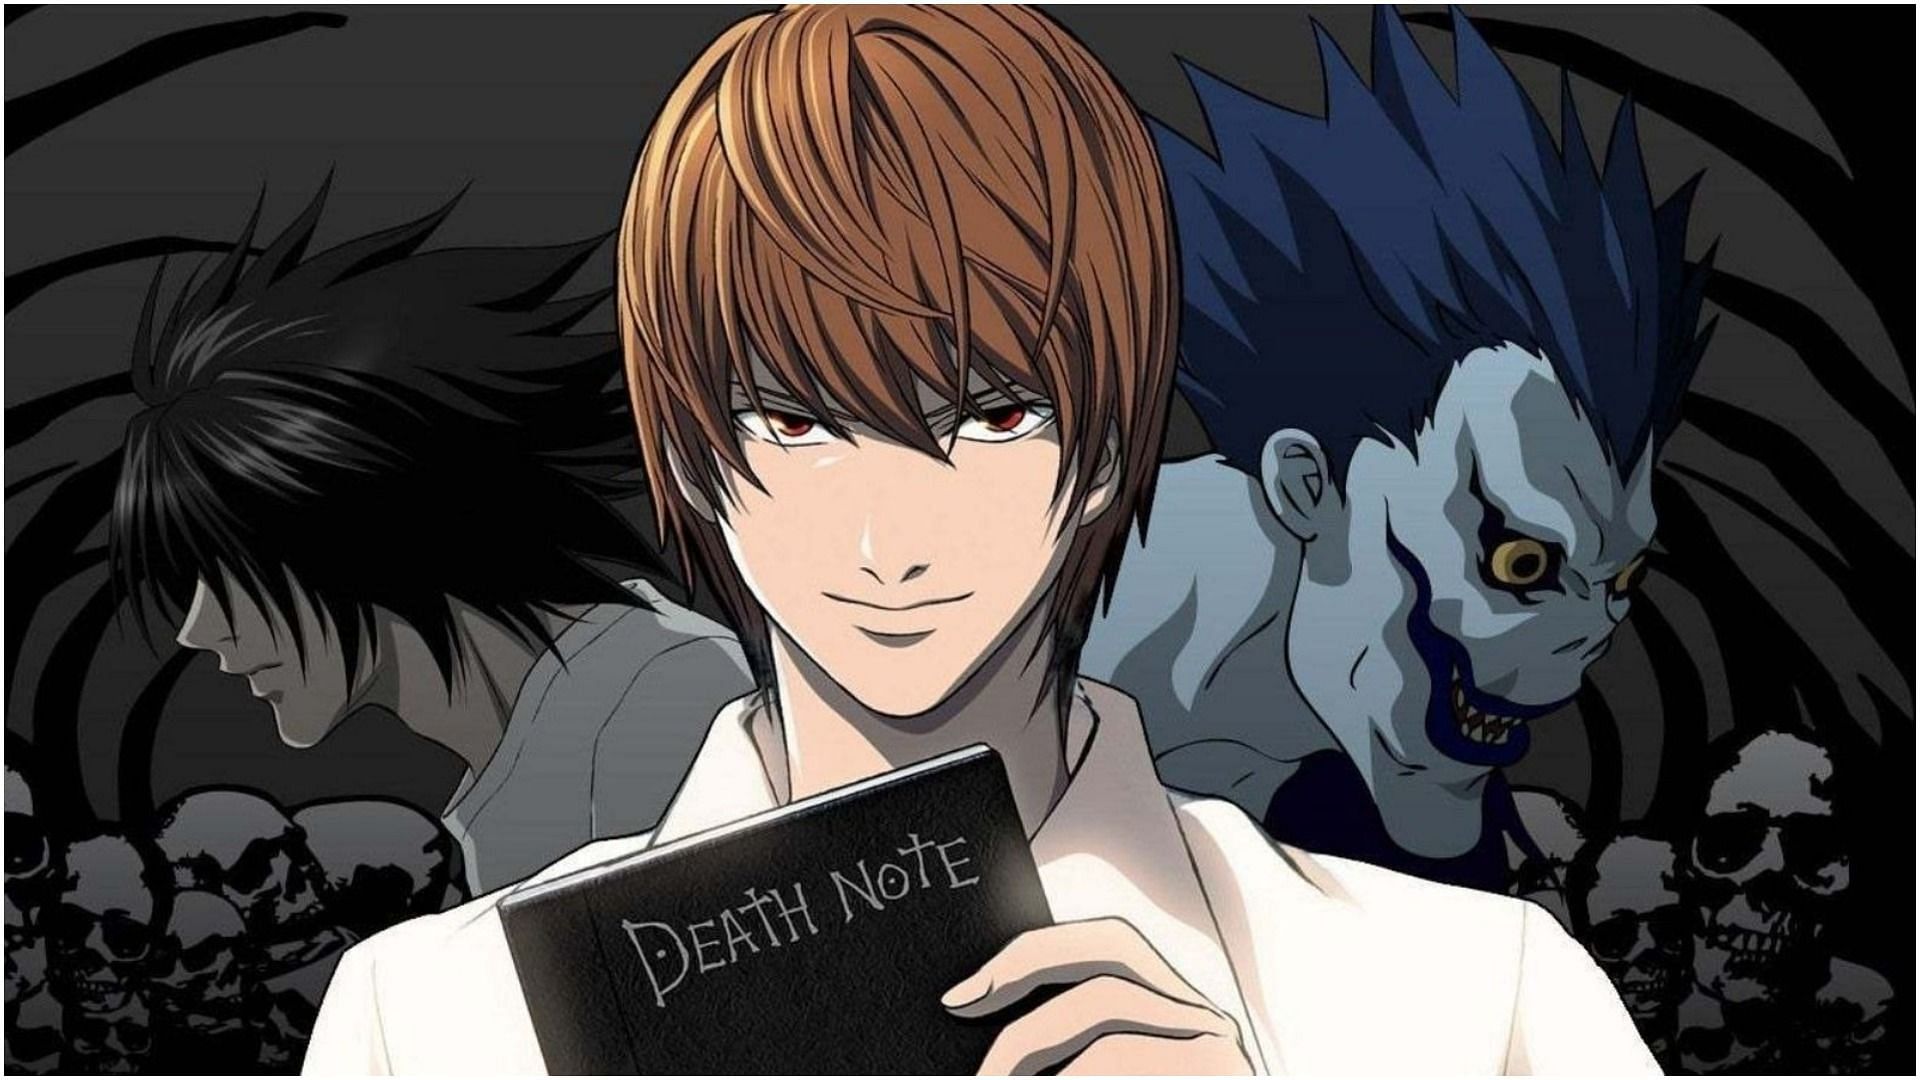 Light Yagami and other key characters in Death Note (Image via Madhouse)